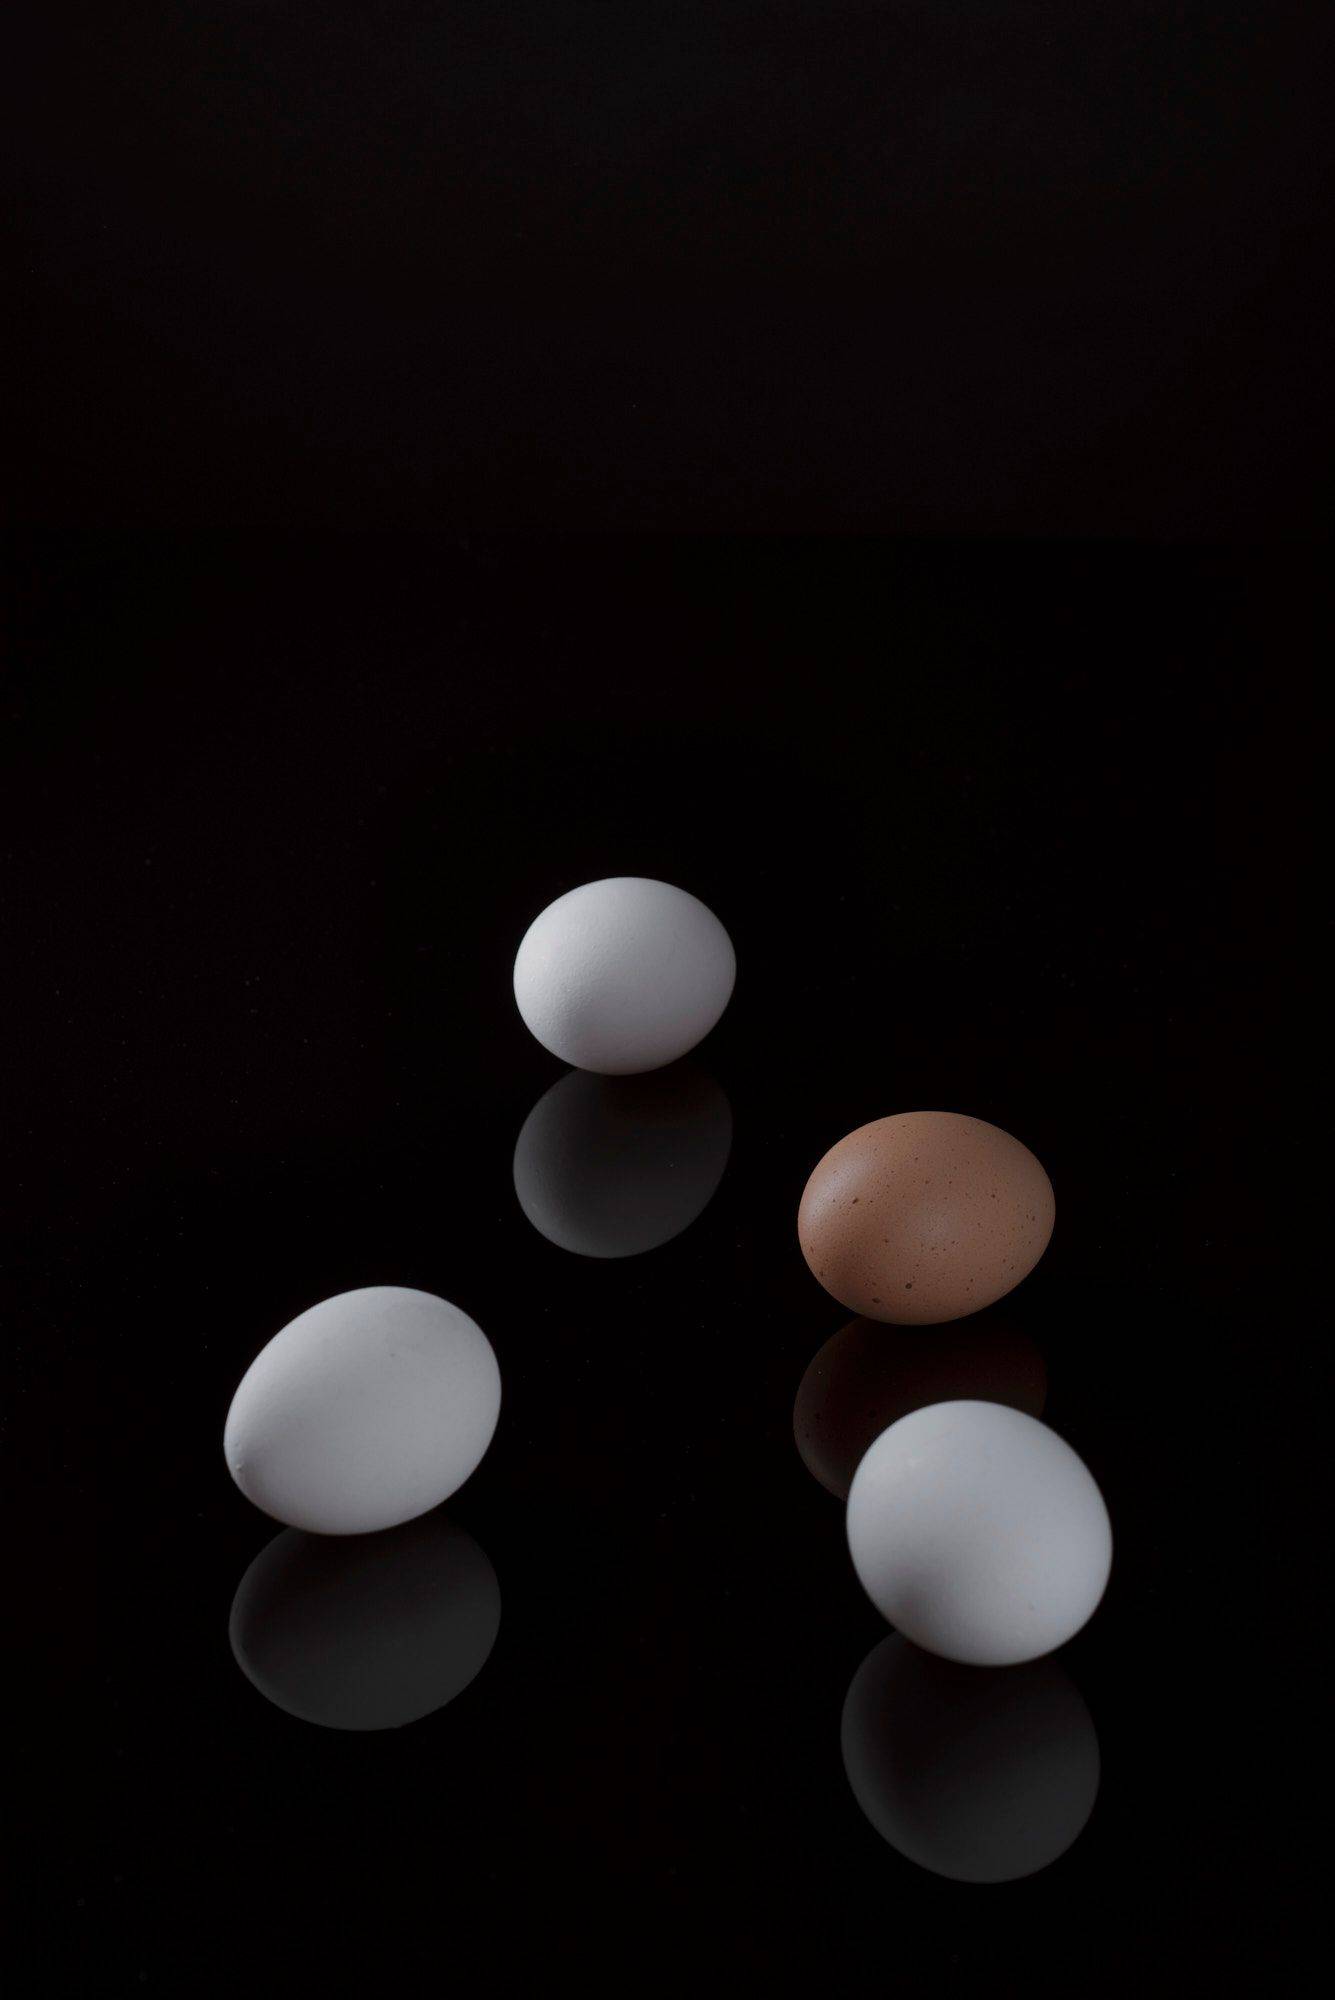 three white and one brown egg with black background